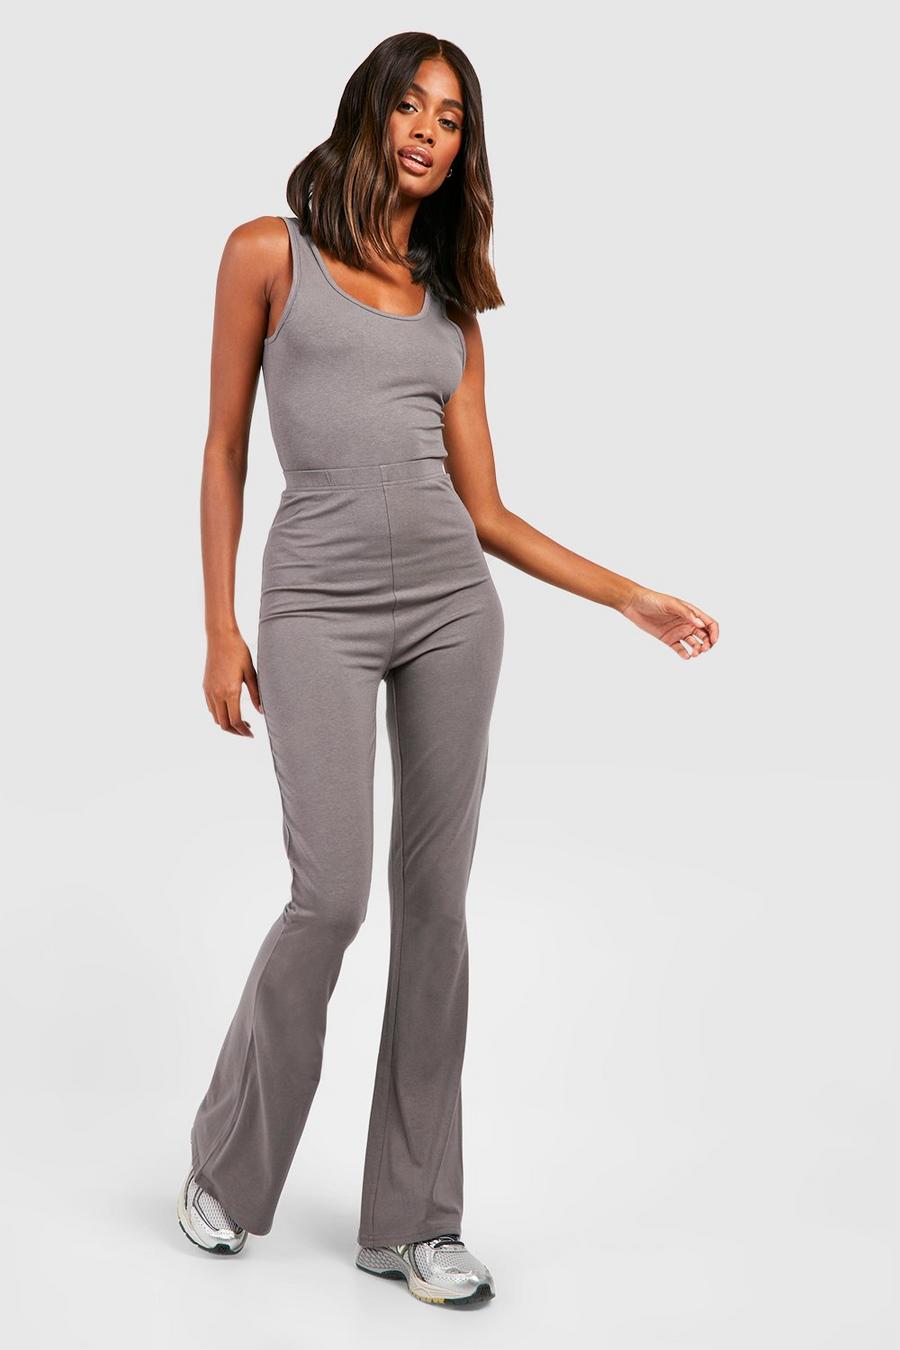 Charcoal grey Premium Super Soft High Waisted Flares